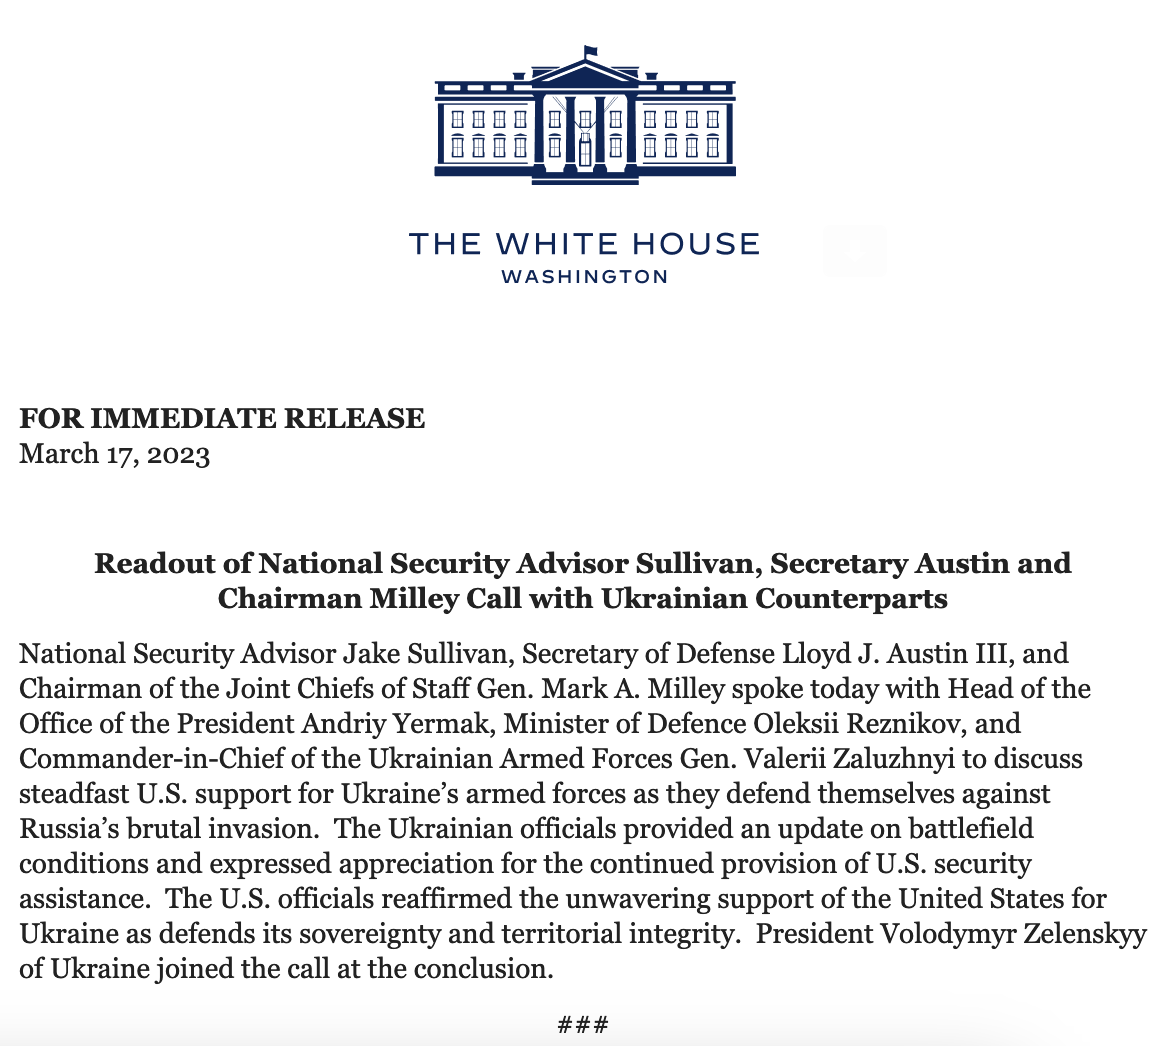 NSC Sullivan, @SecDef Austin and Chairman Milley spoke with Ukrainian Counterparts.  President @ZelenskyyUa joined the call at the conclusion, per White House